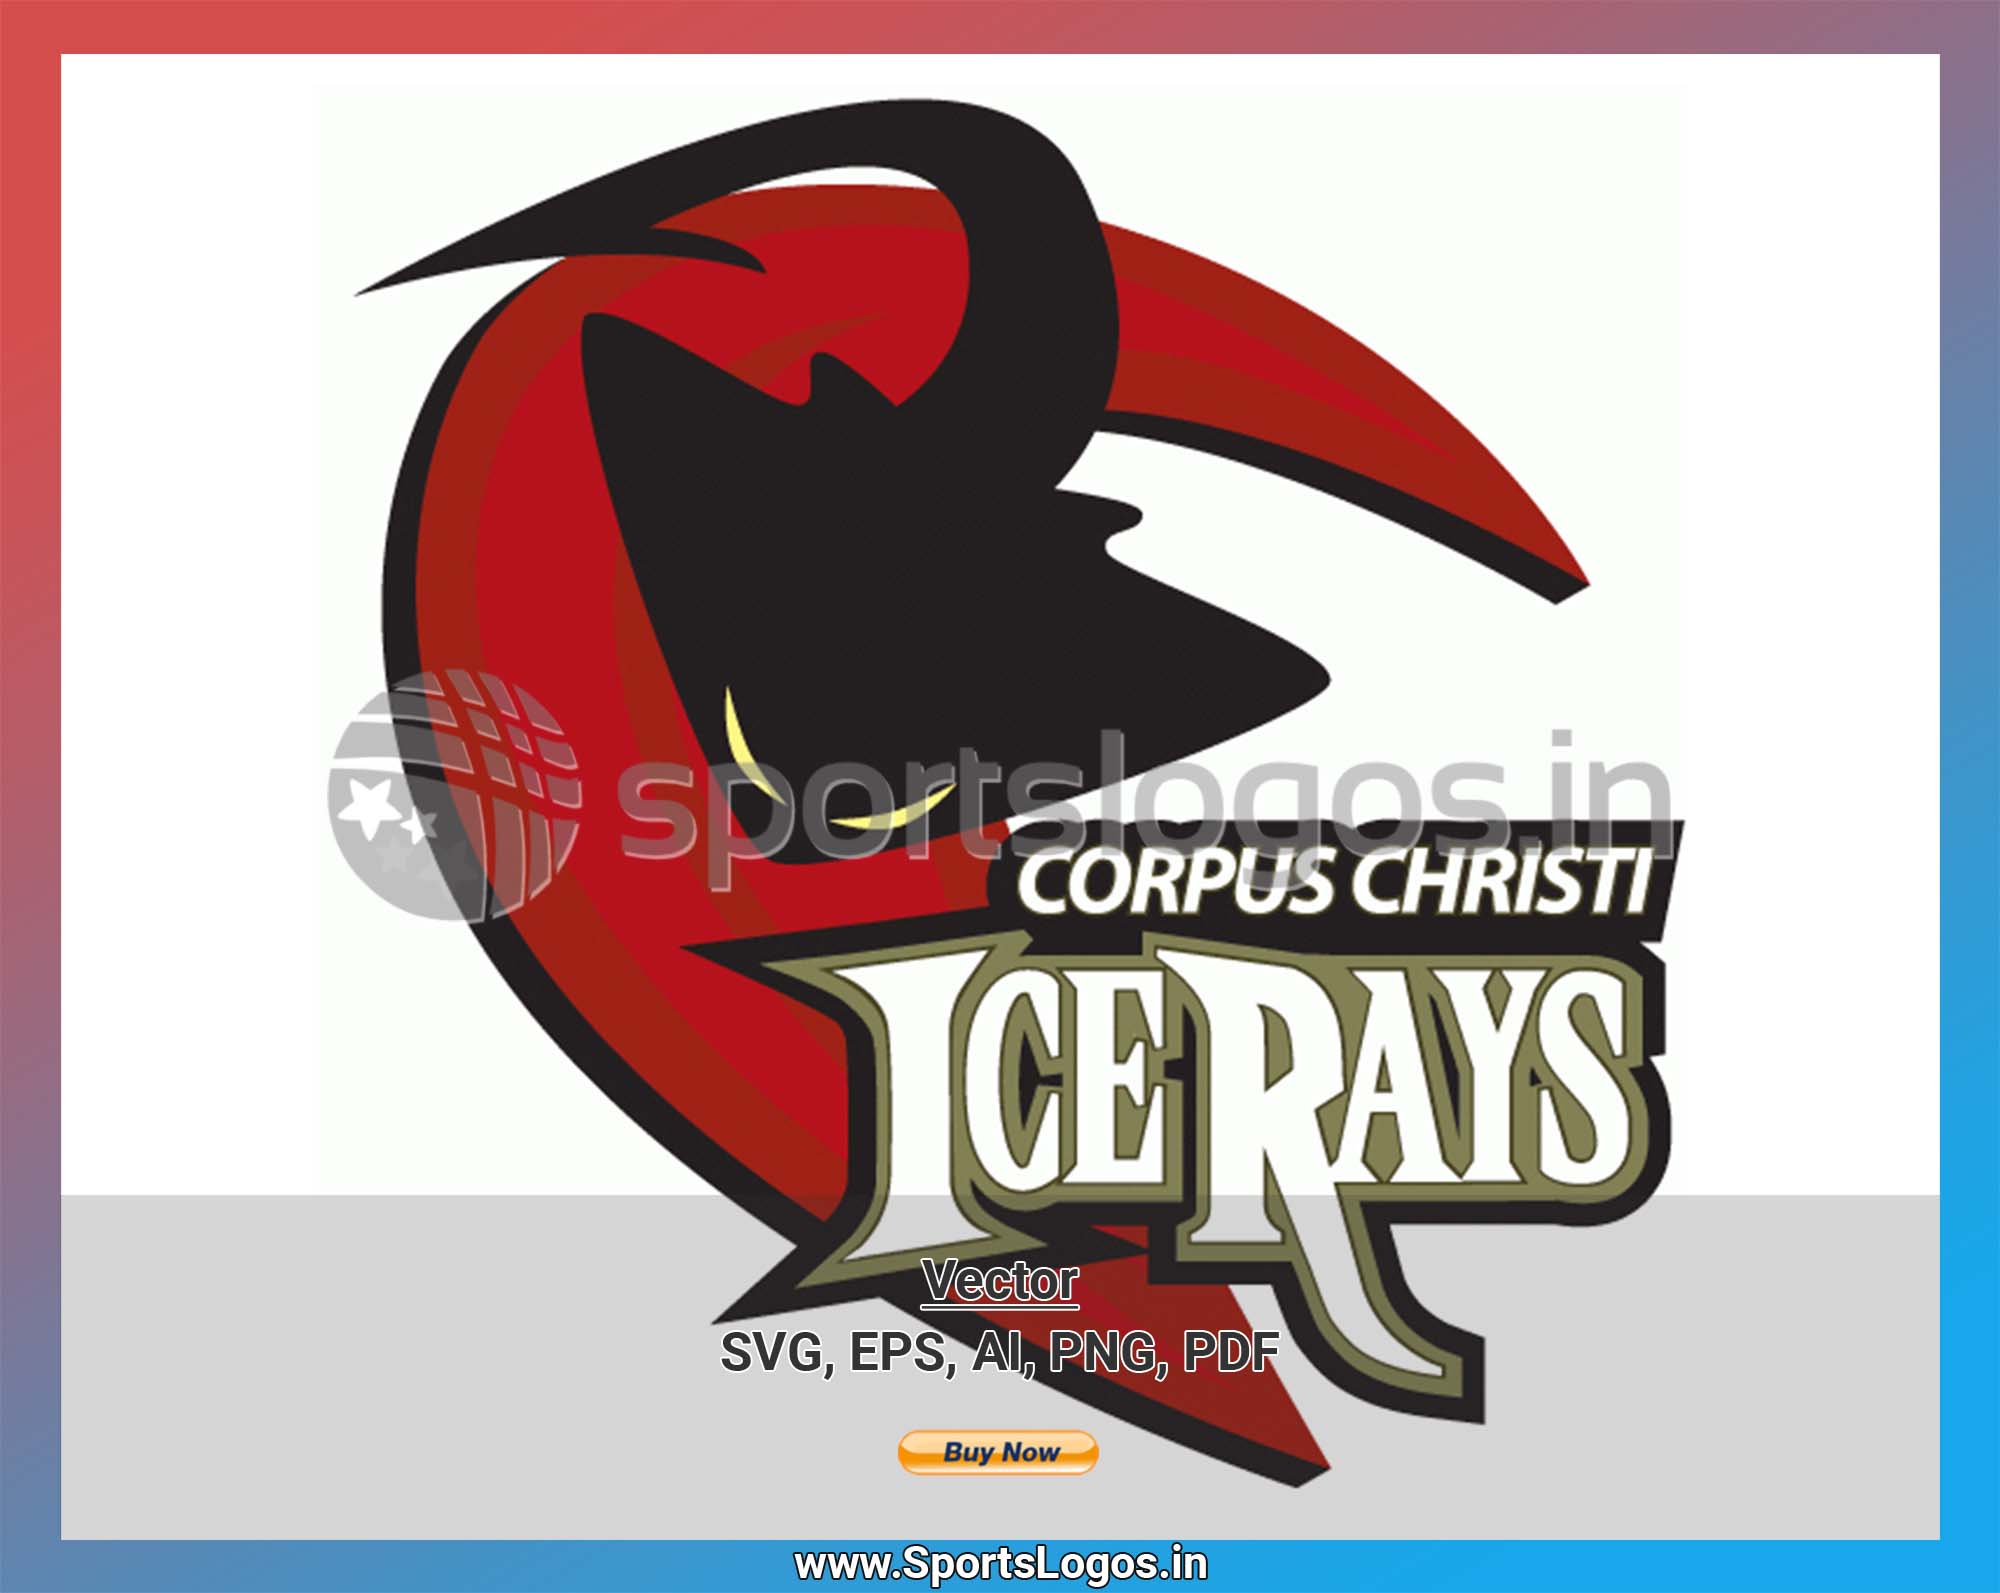 Corpus Christi IceRays - Hockey Sports Vector SVG Logo in 5 formats -  SPLN001038 • Sports Logos - Embroidery & Vector for NFL, NBA, NHL, MLB,  MiLB, and more!